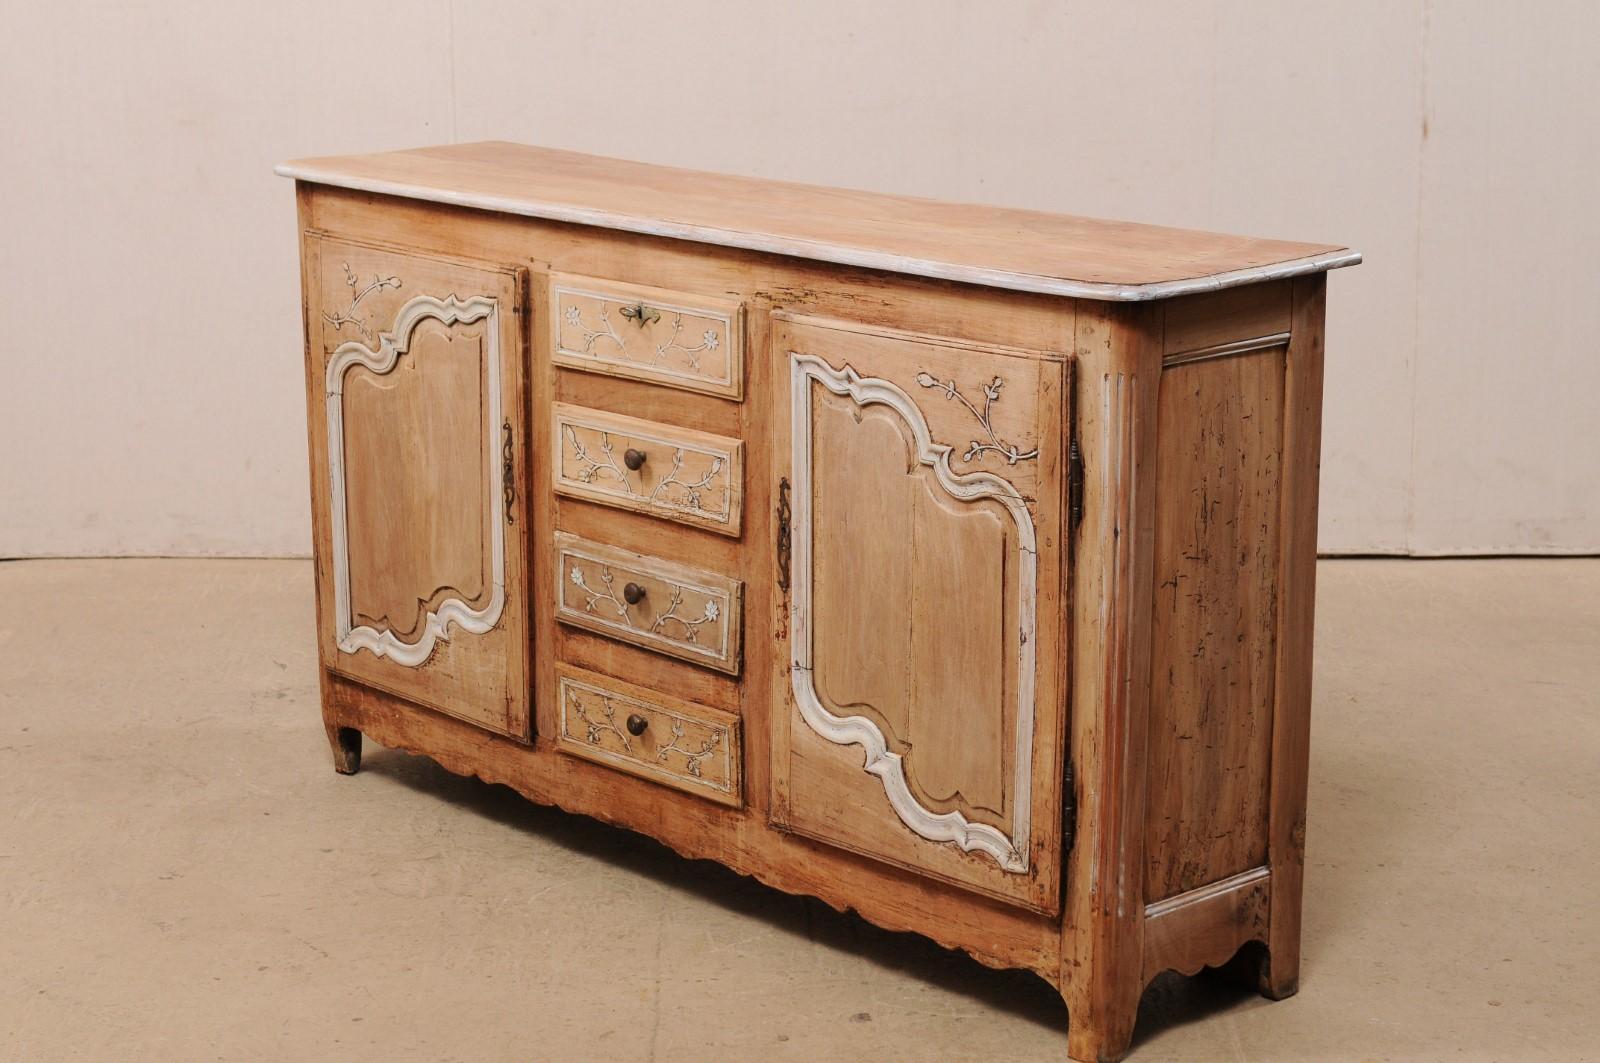 Antique French Sideboard Cabinet with Delicate Floral Carvings & Scalloped Skirt 4